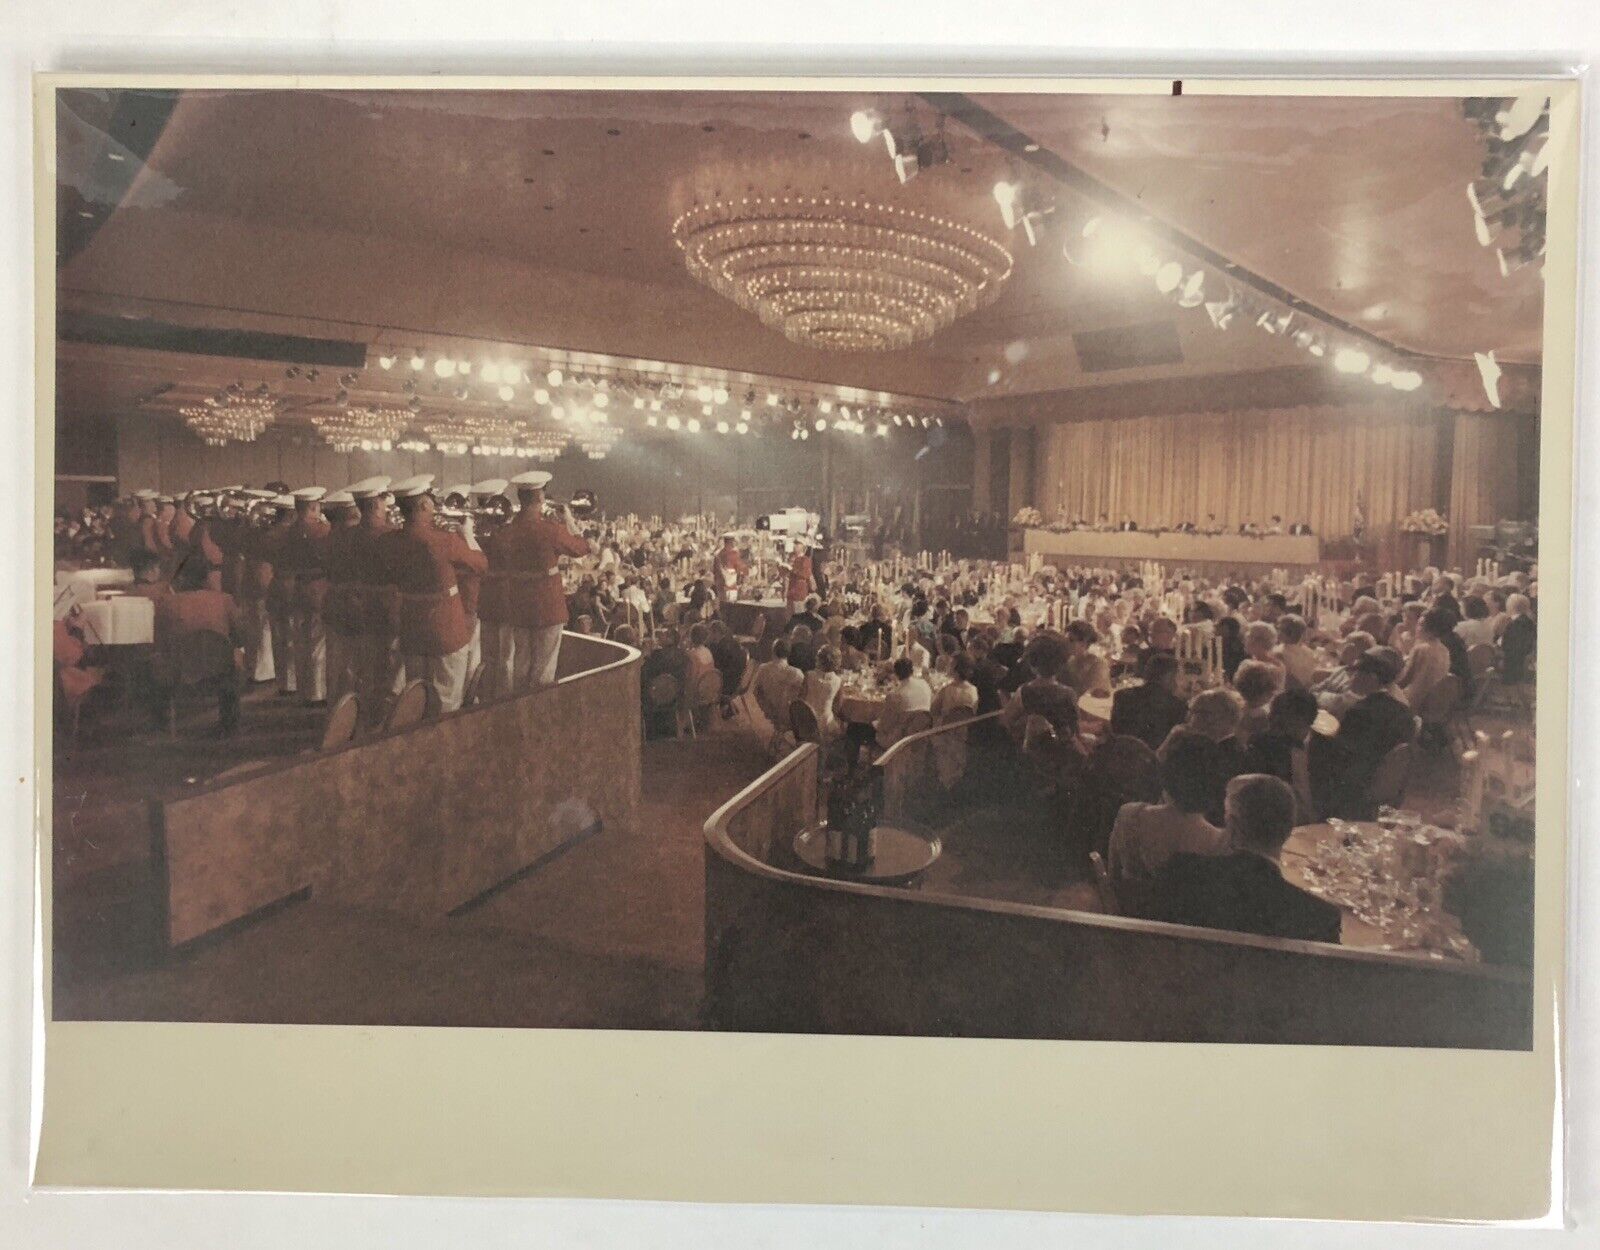 Product Image for APOLLO XI | 1969 CENTURY PLAZA DINNER COLLECTION OF PHOTOGRAPHS AND EPHEMERA